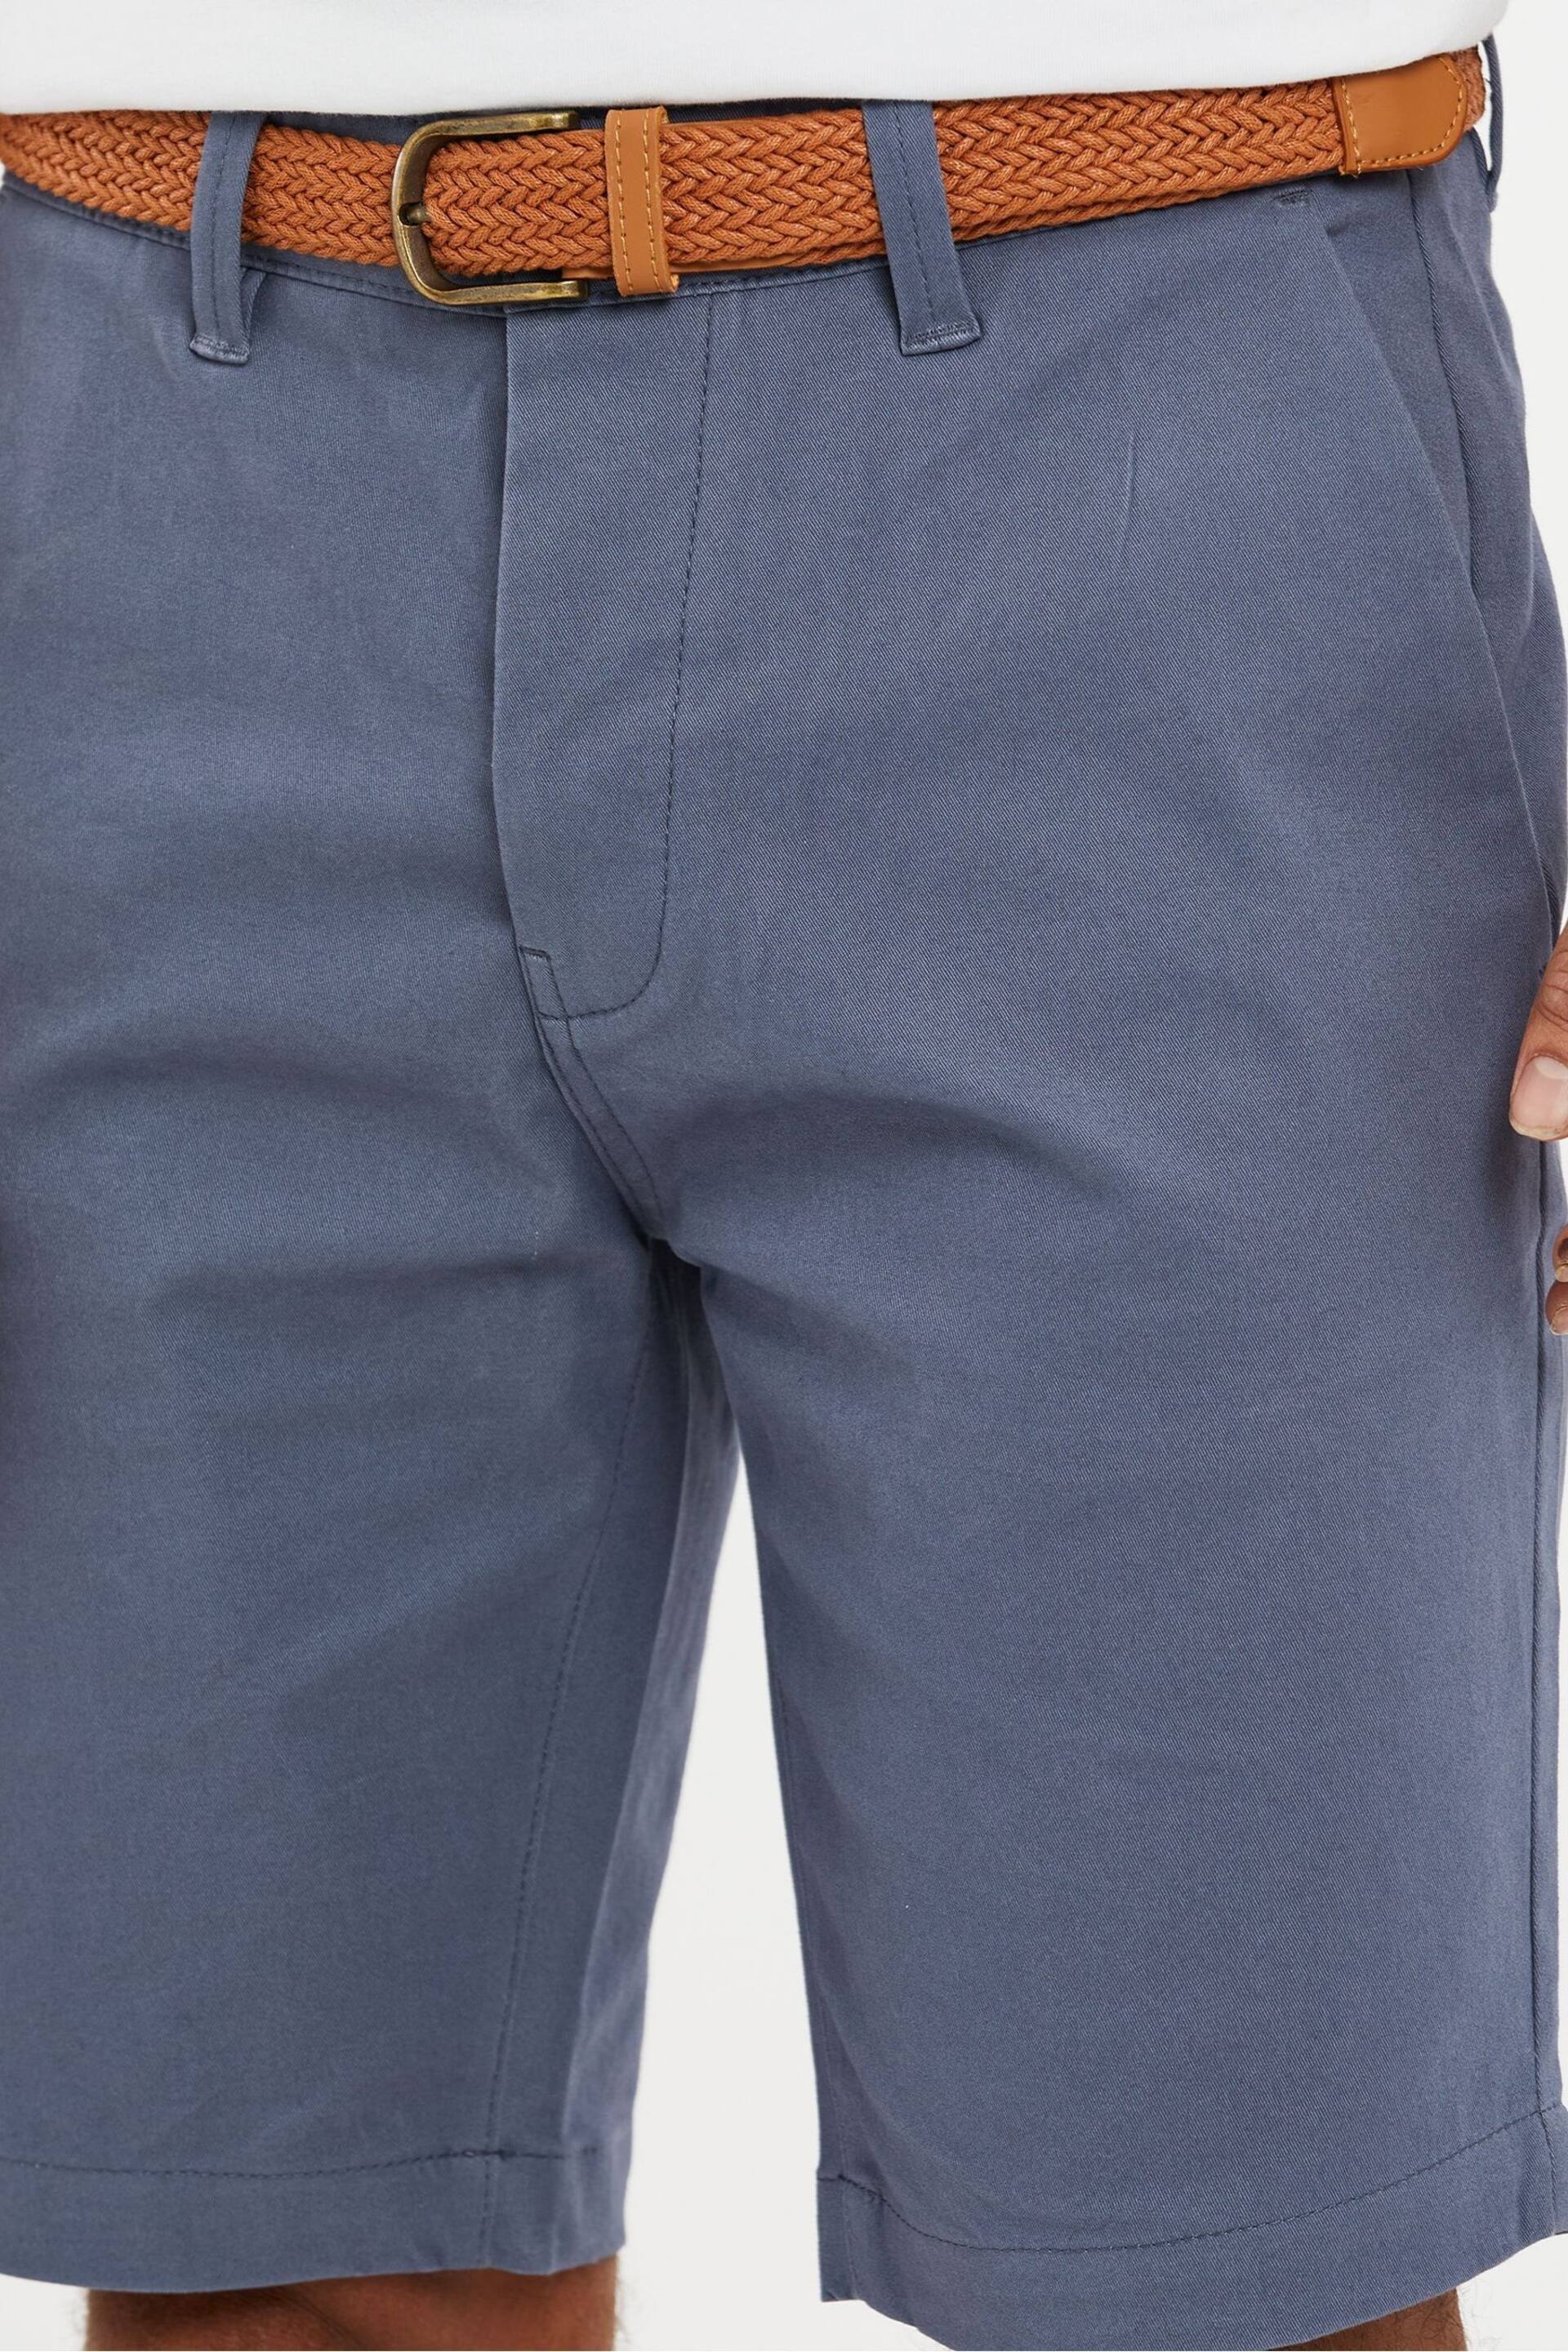 Threadbare Blue Cotton Stretch Turn-Up Chino Shorts with Woven Belt - Image 4 of 4